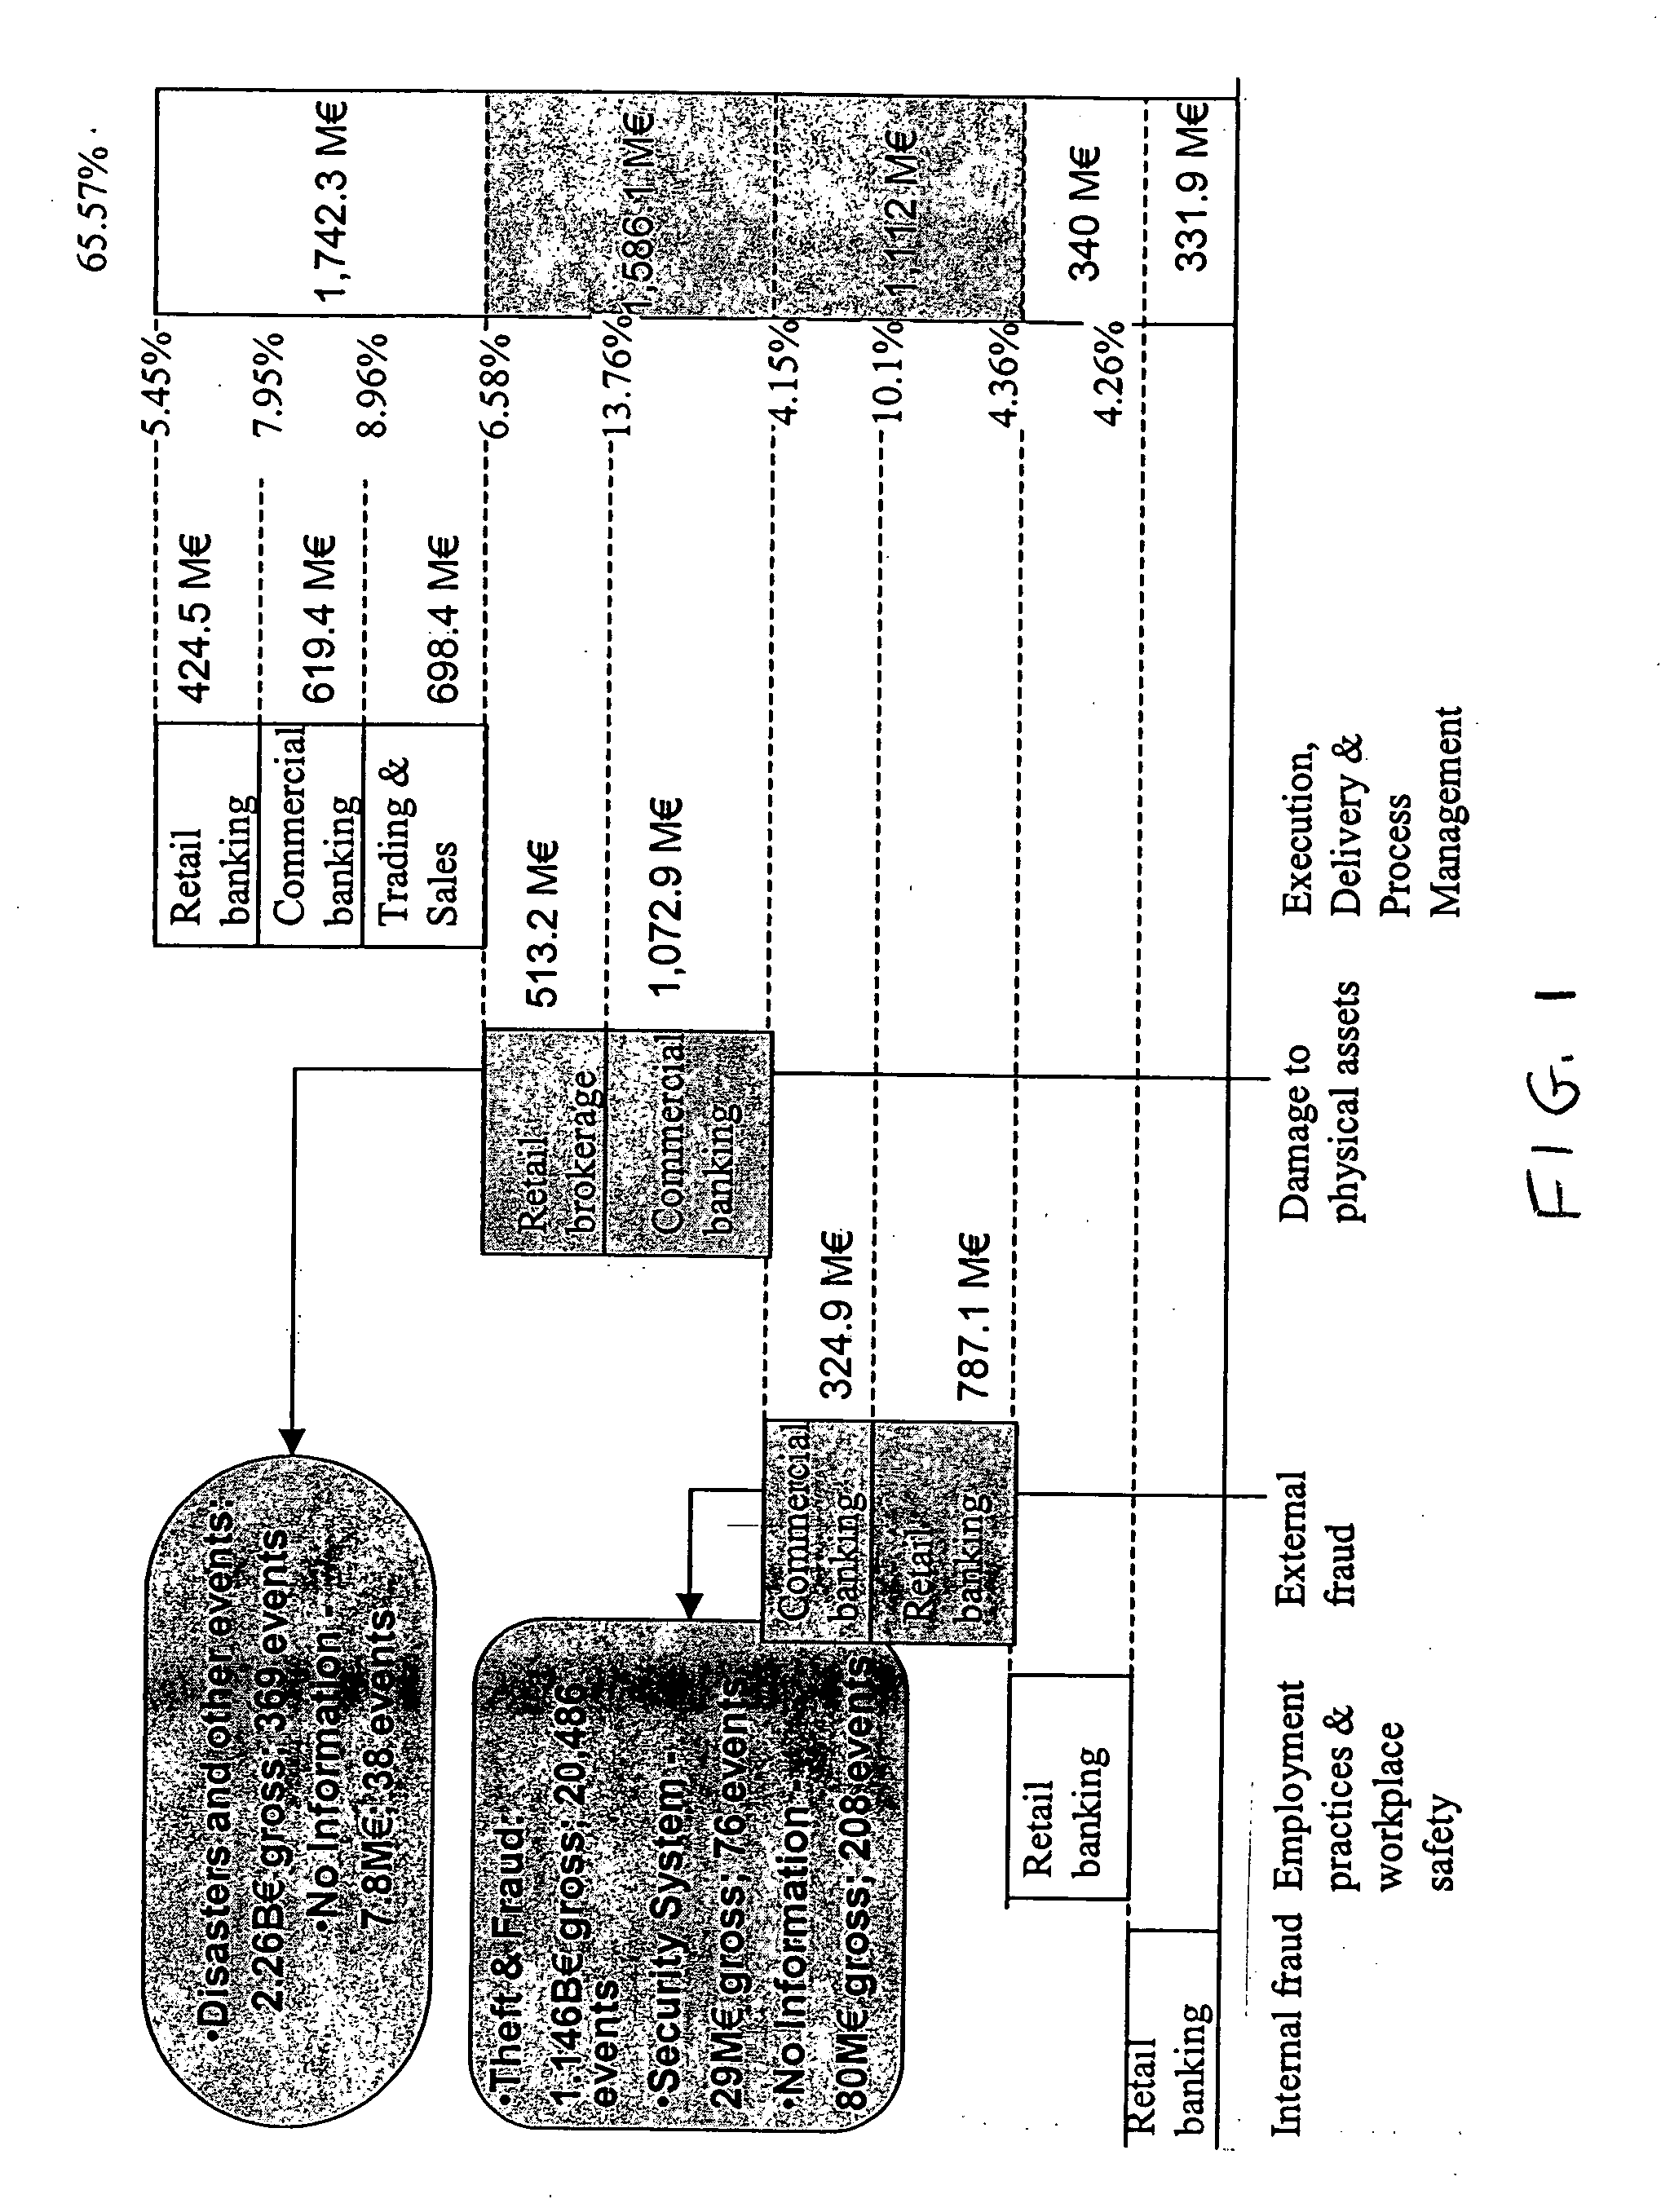 System and method for generating and using a pooled knowledge base